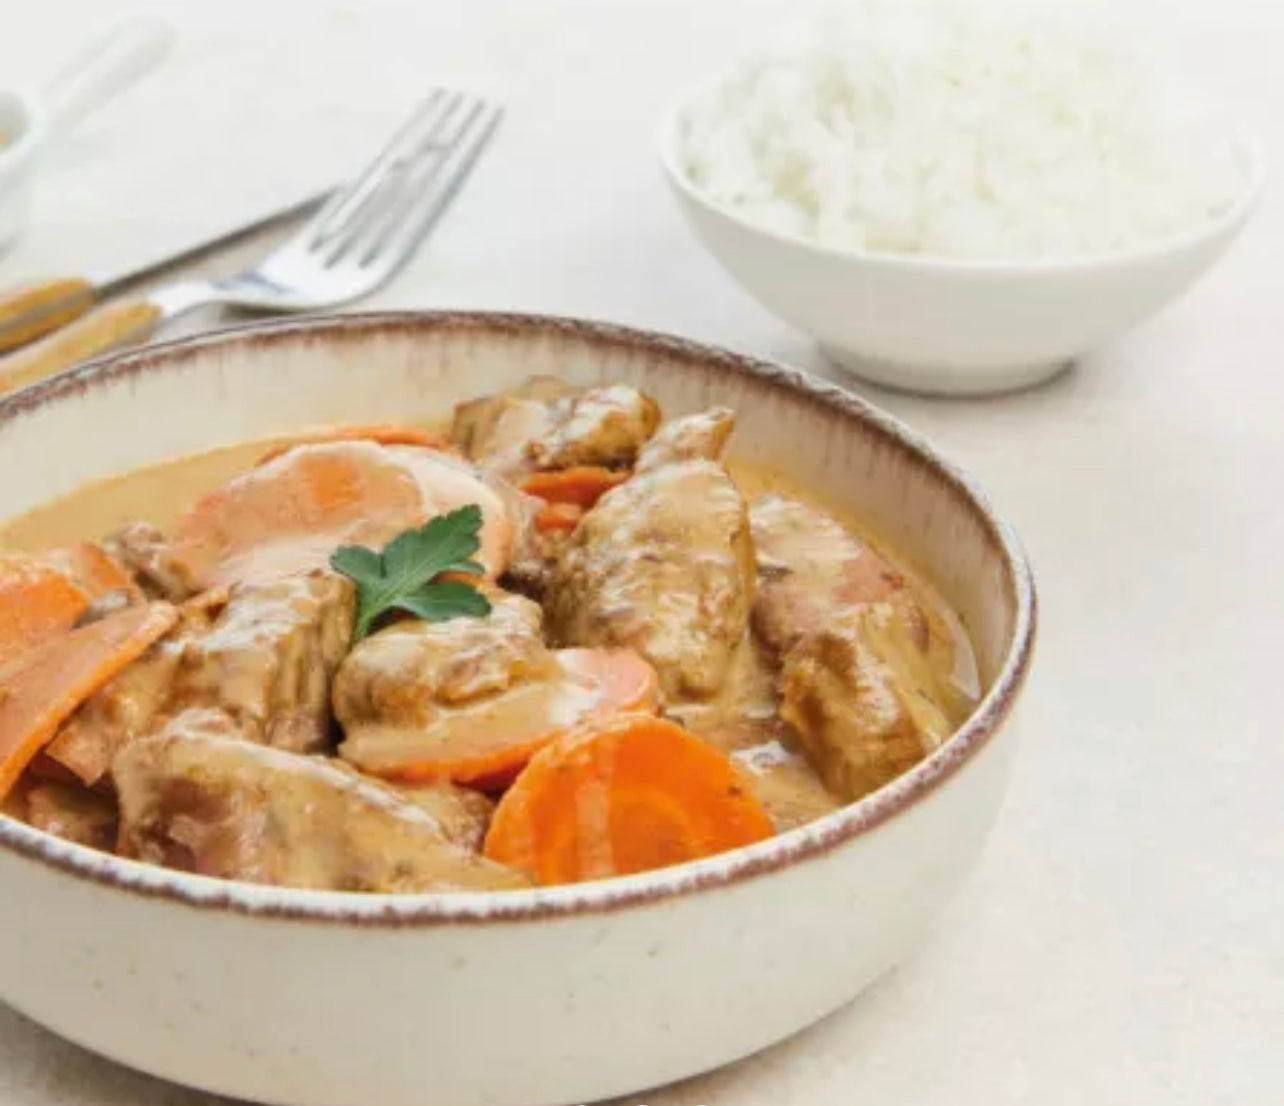 Veal blanquette and Thai rice - 350g